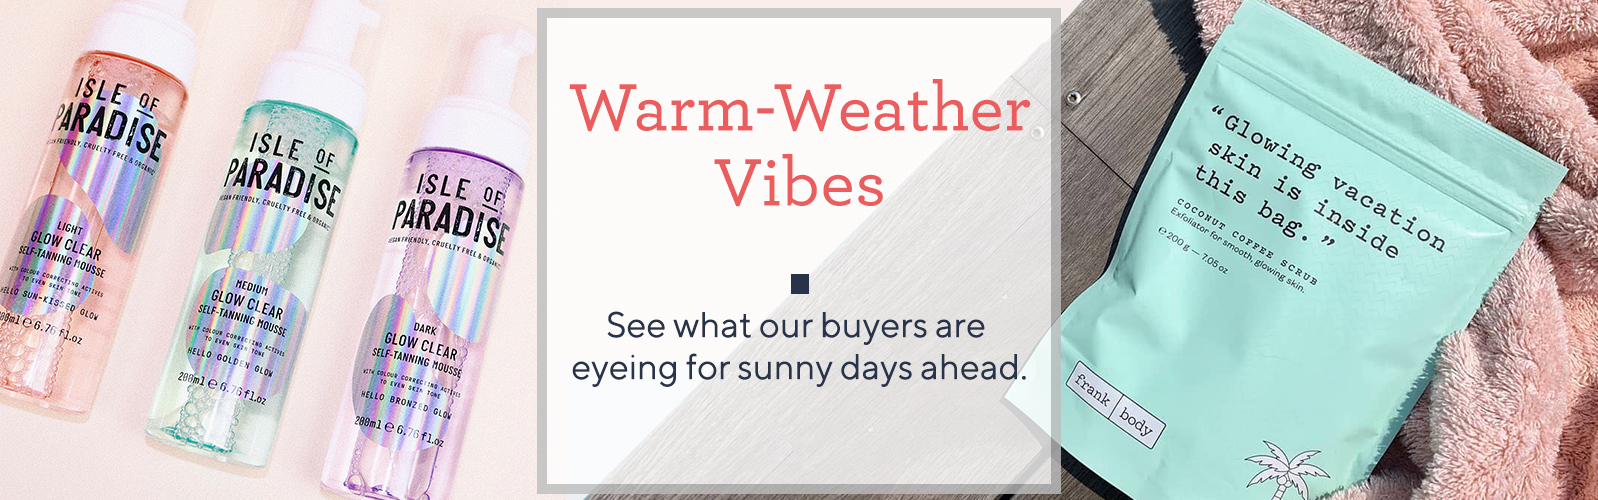 Warm-Weather Vibes - See what our buyers are eyeing  for sunny days ahead.